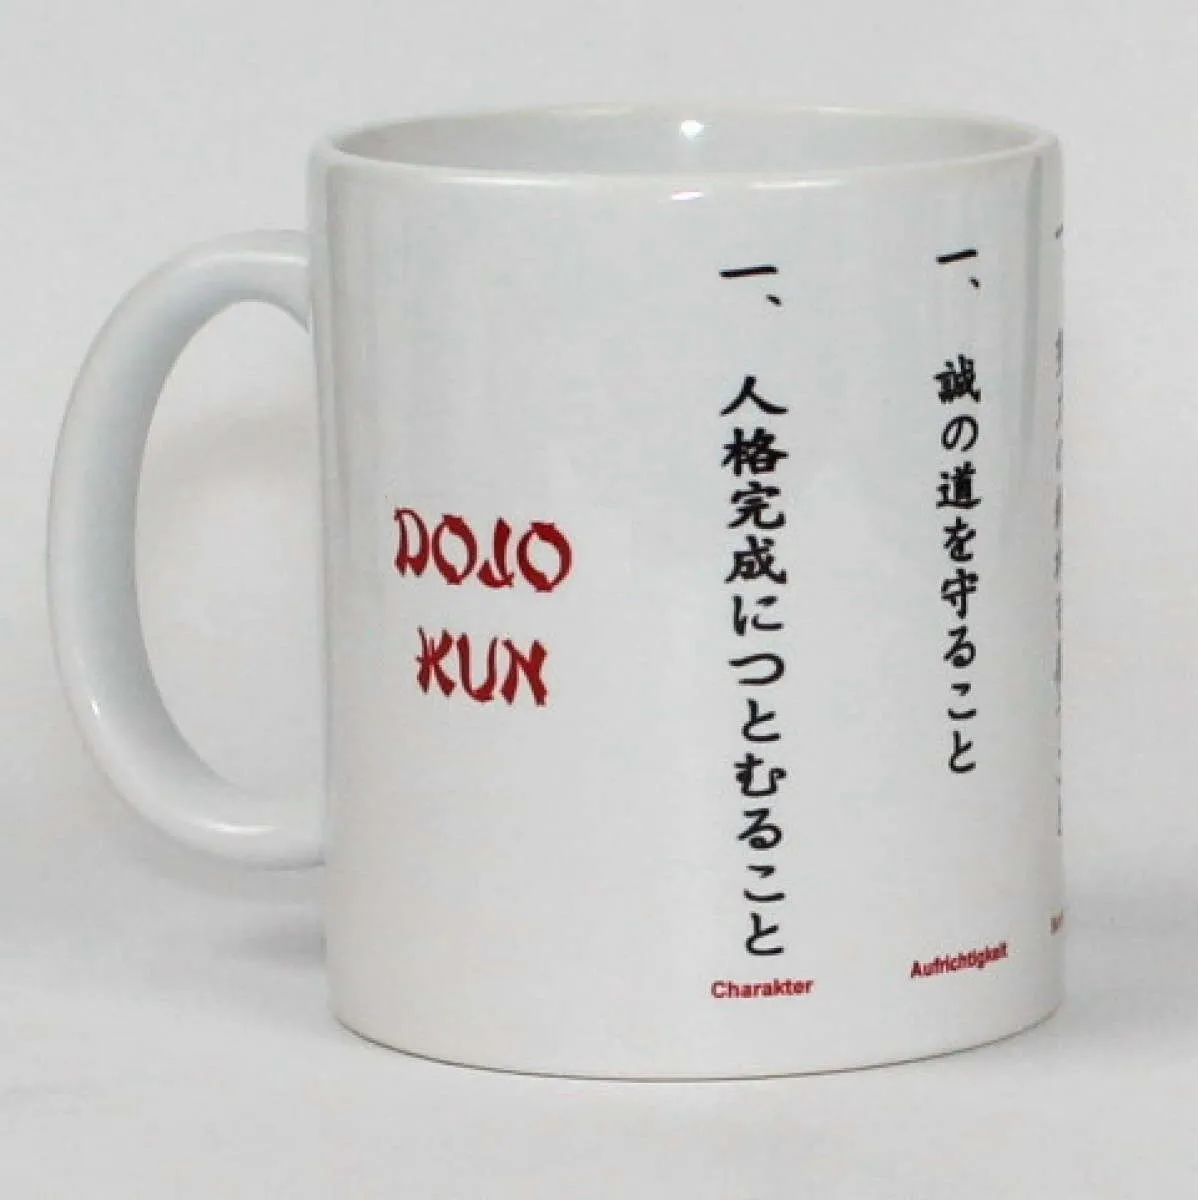 cup white printed with Aikido evolution - Kopie - Kopie - Kopie - Kopie - Kopie